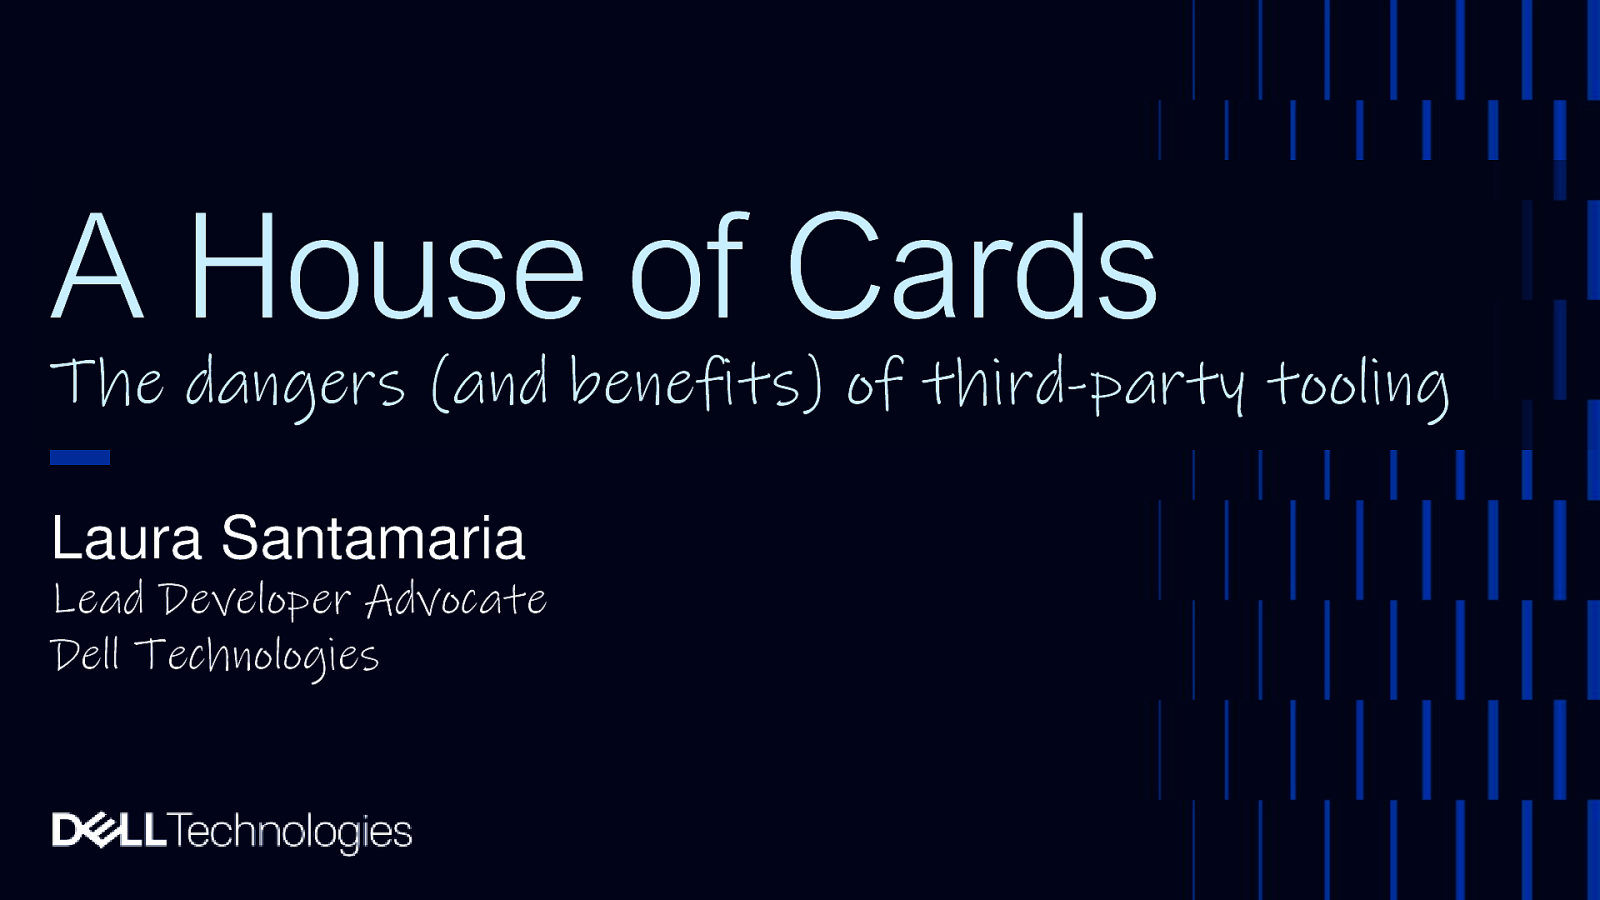 A House of Cards: The dangers (and benefits) of third-party tooling by Laura Santamaria